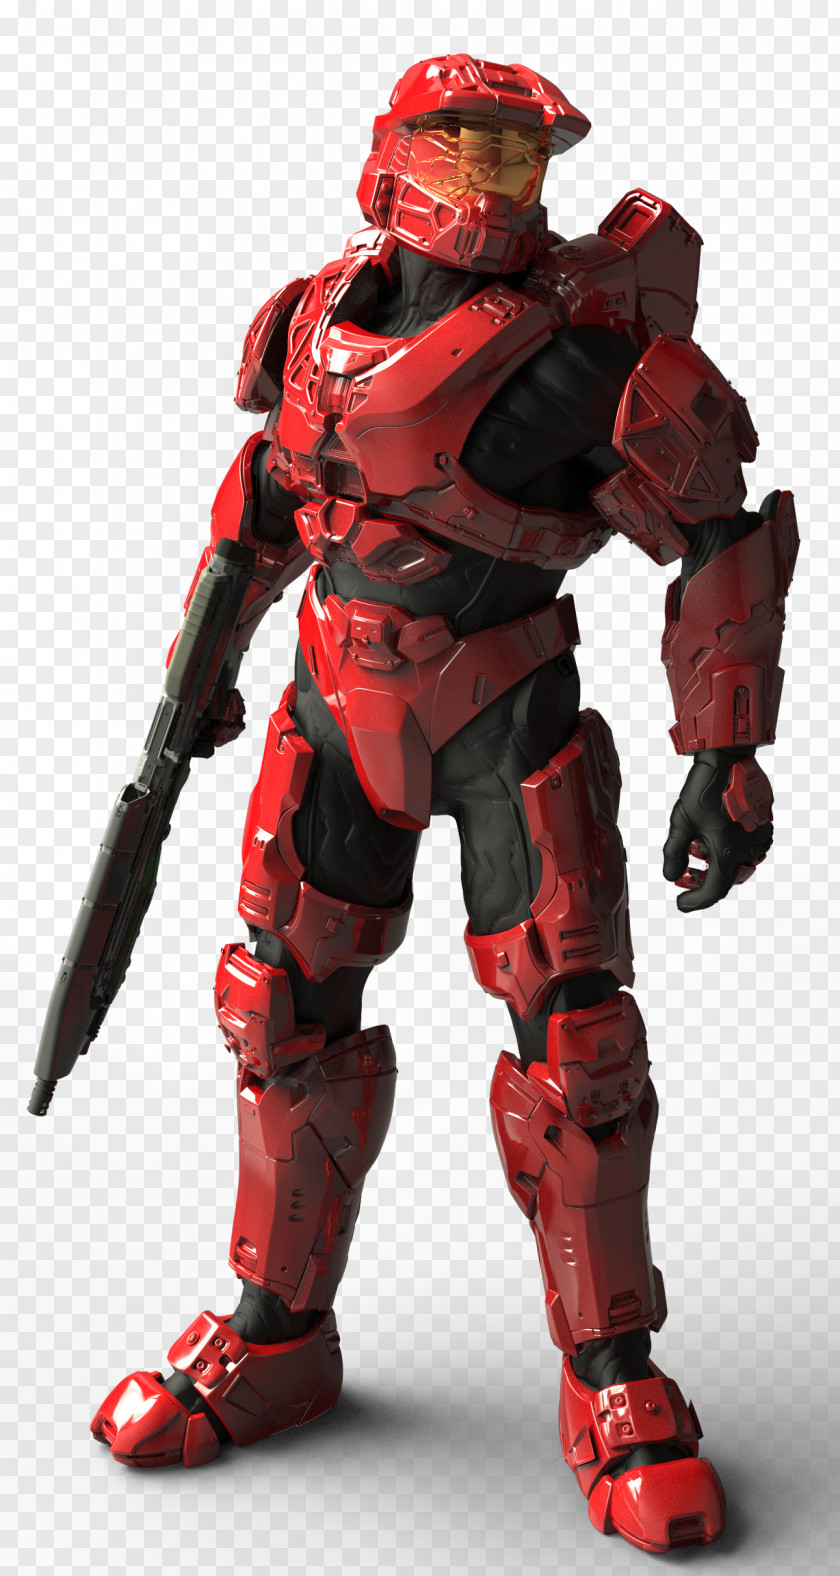 Iron Man Halo 5: Guardians Halo: The Master Chief Collection Reach 4 Combat Evolved PNG